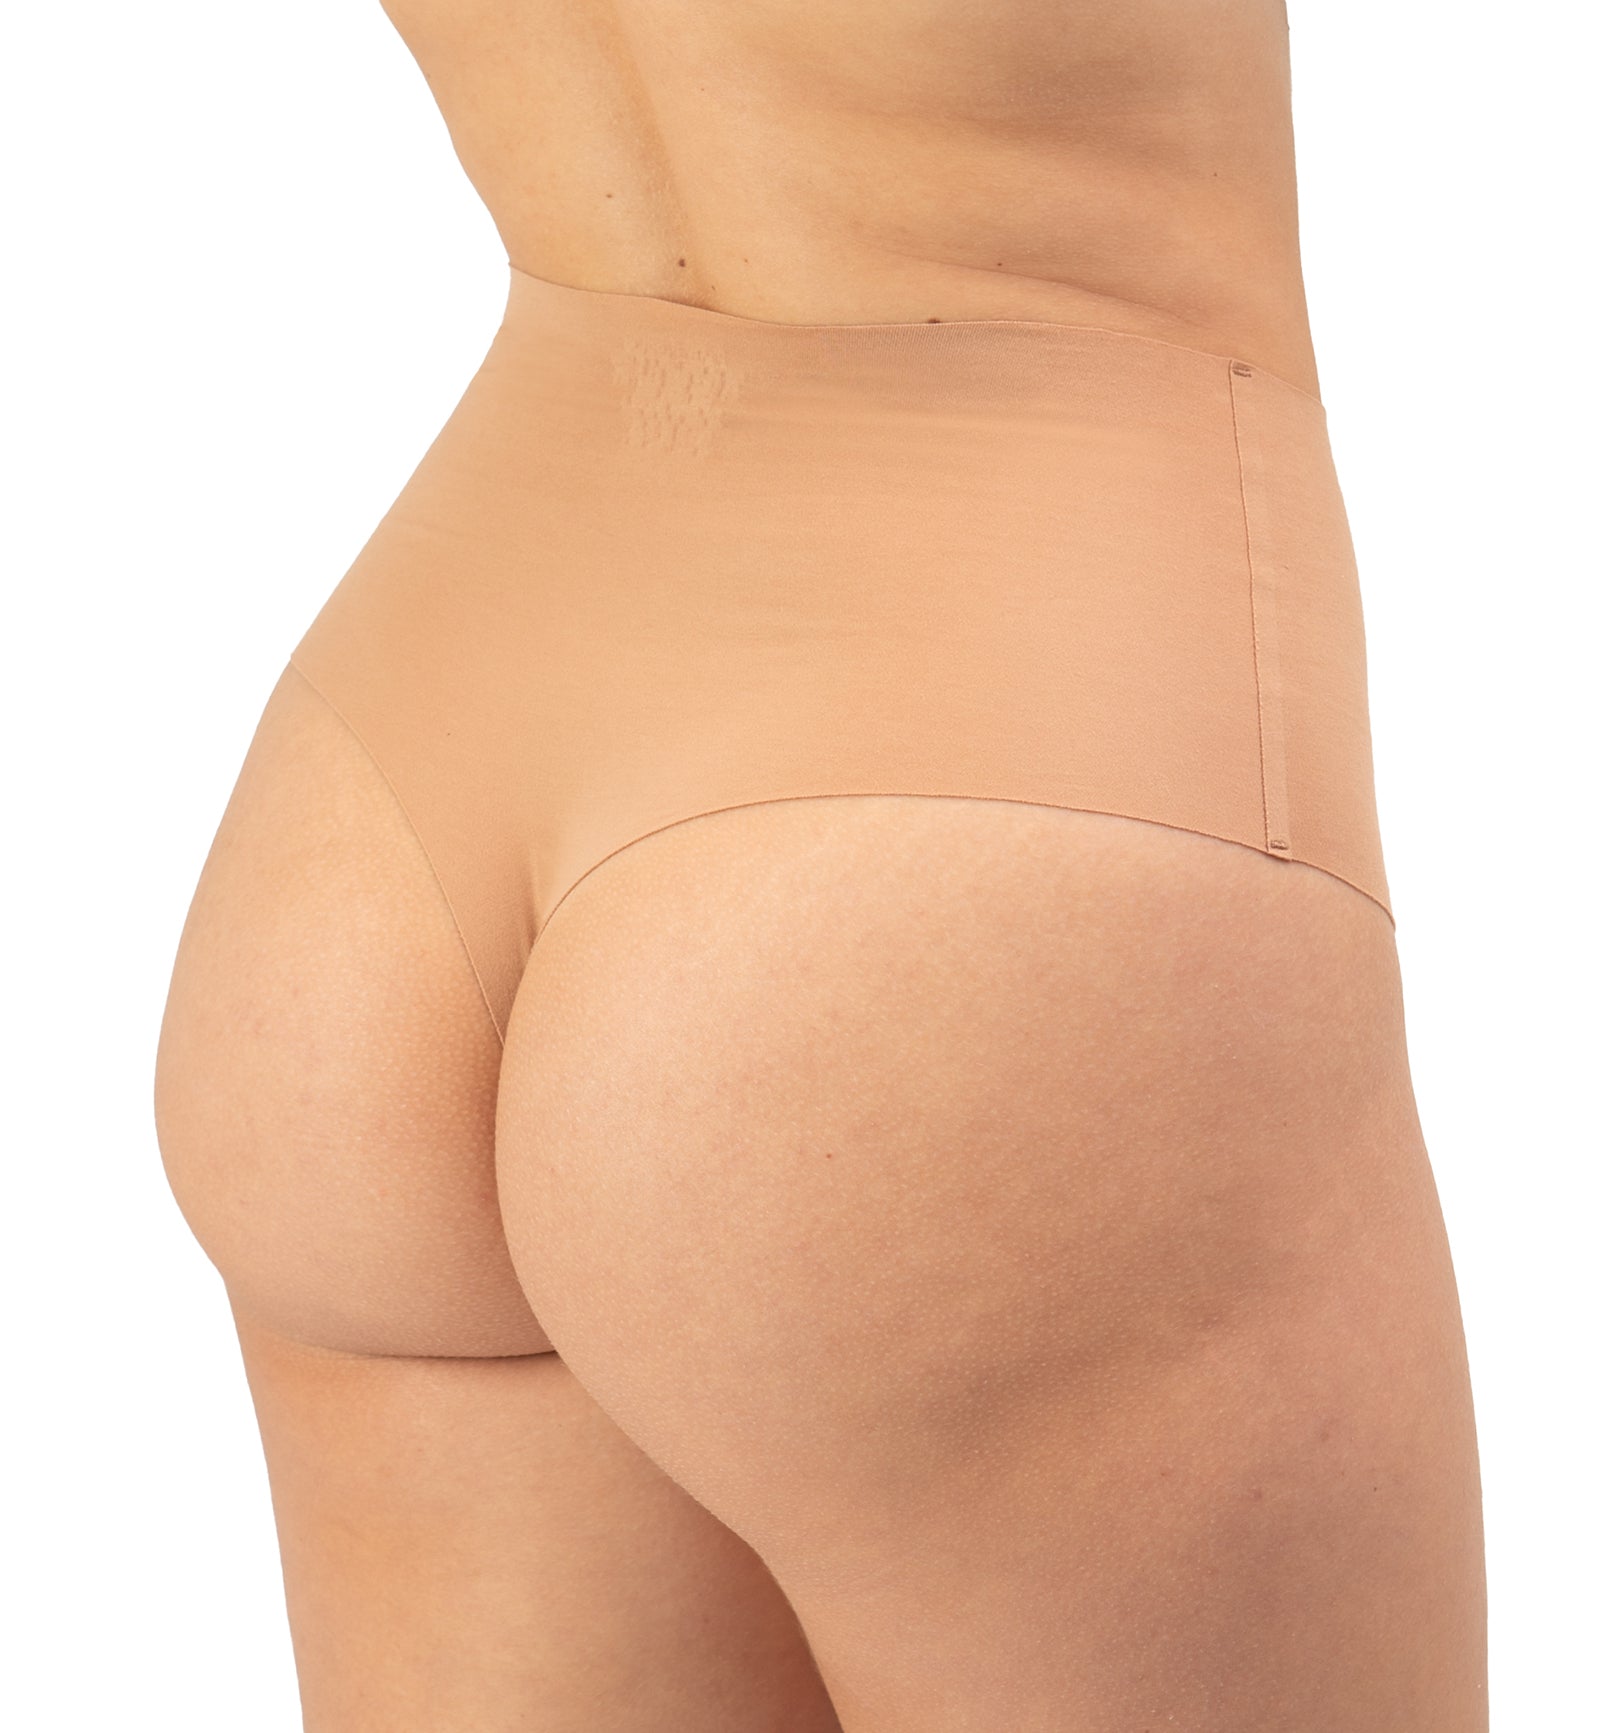 Panty Promise High Waist Thong,XS,Sand - Sand,XS